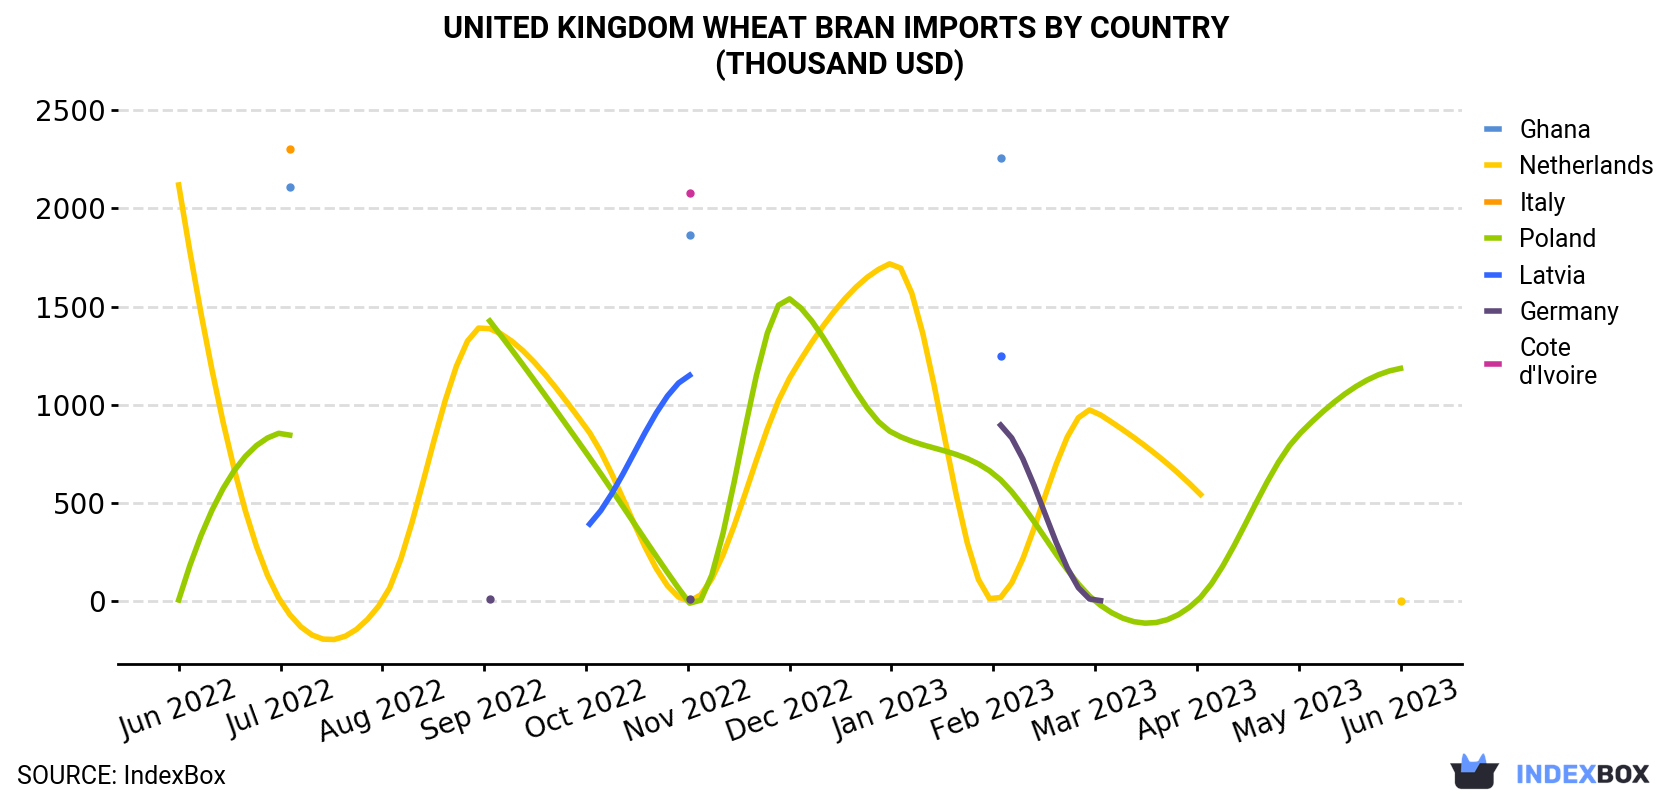 United Kingdom Wheat Bran Imports By Country (Thousand USD)